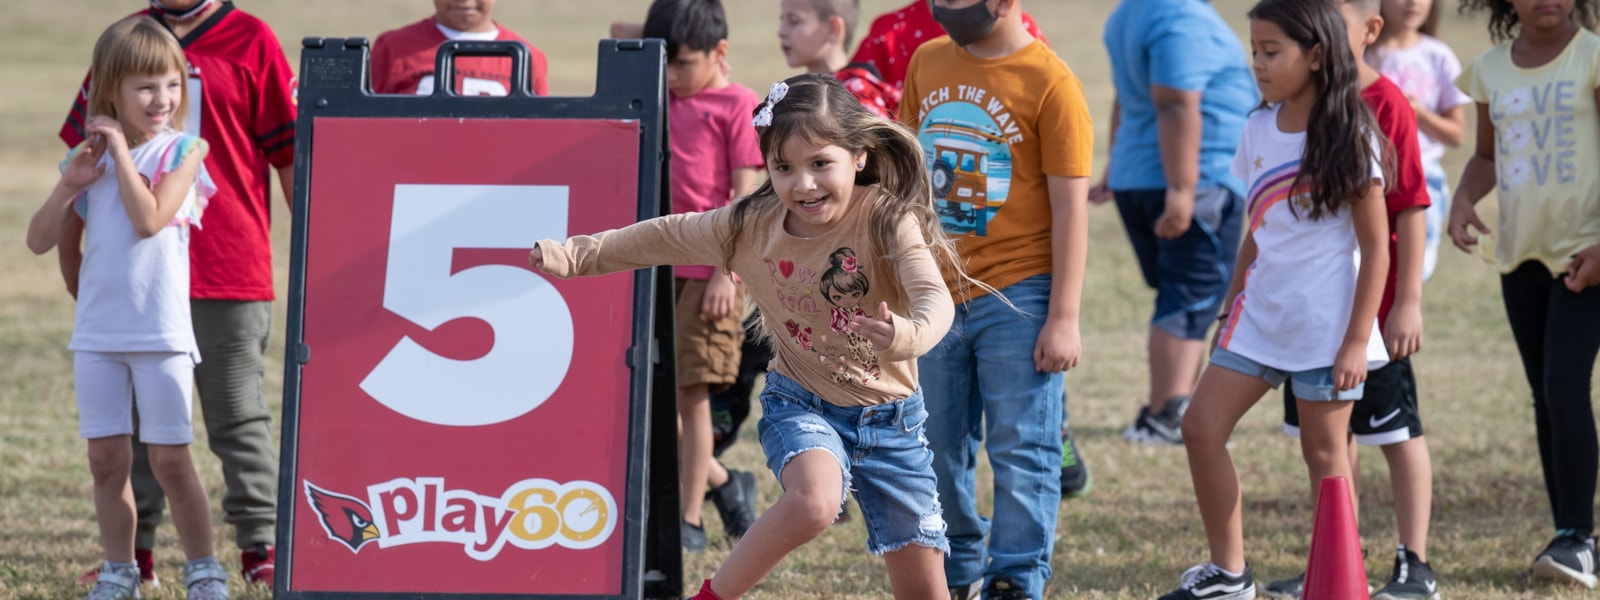 Students running in Play 60 Campaign